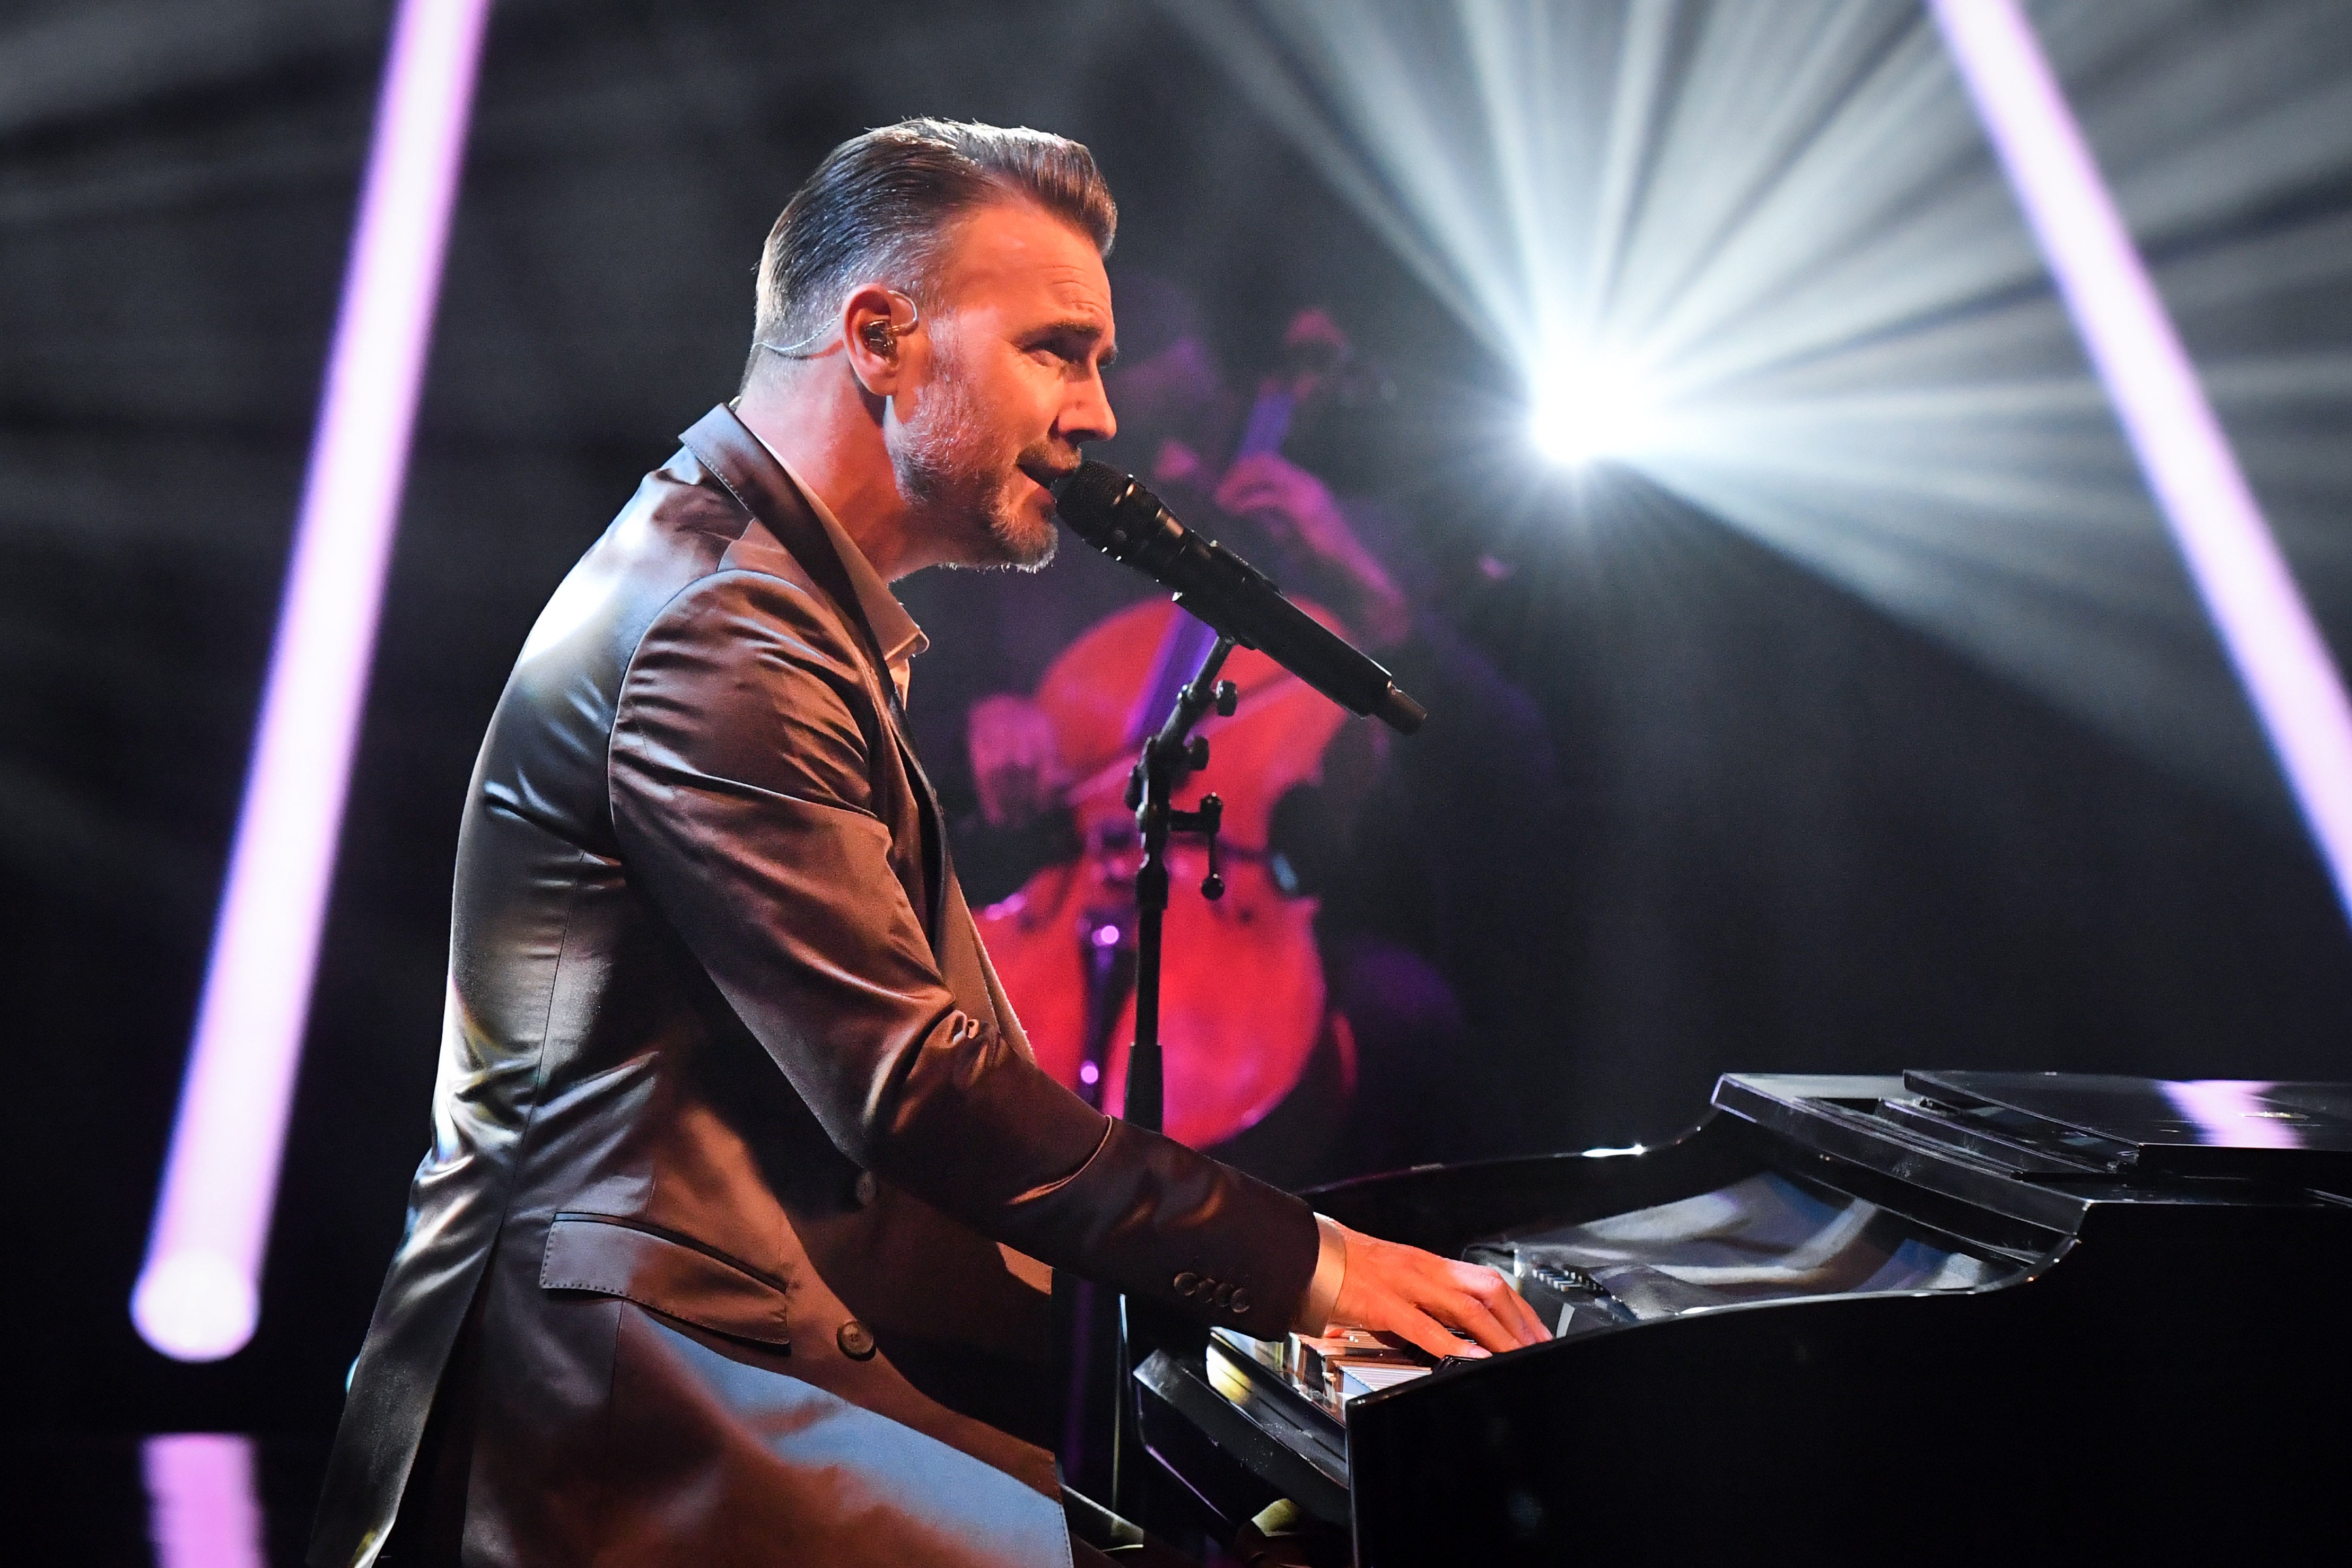 Gary Barlow performs during the filming for the Graham Norton Show